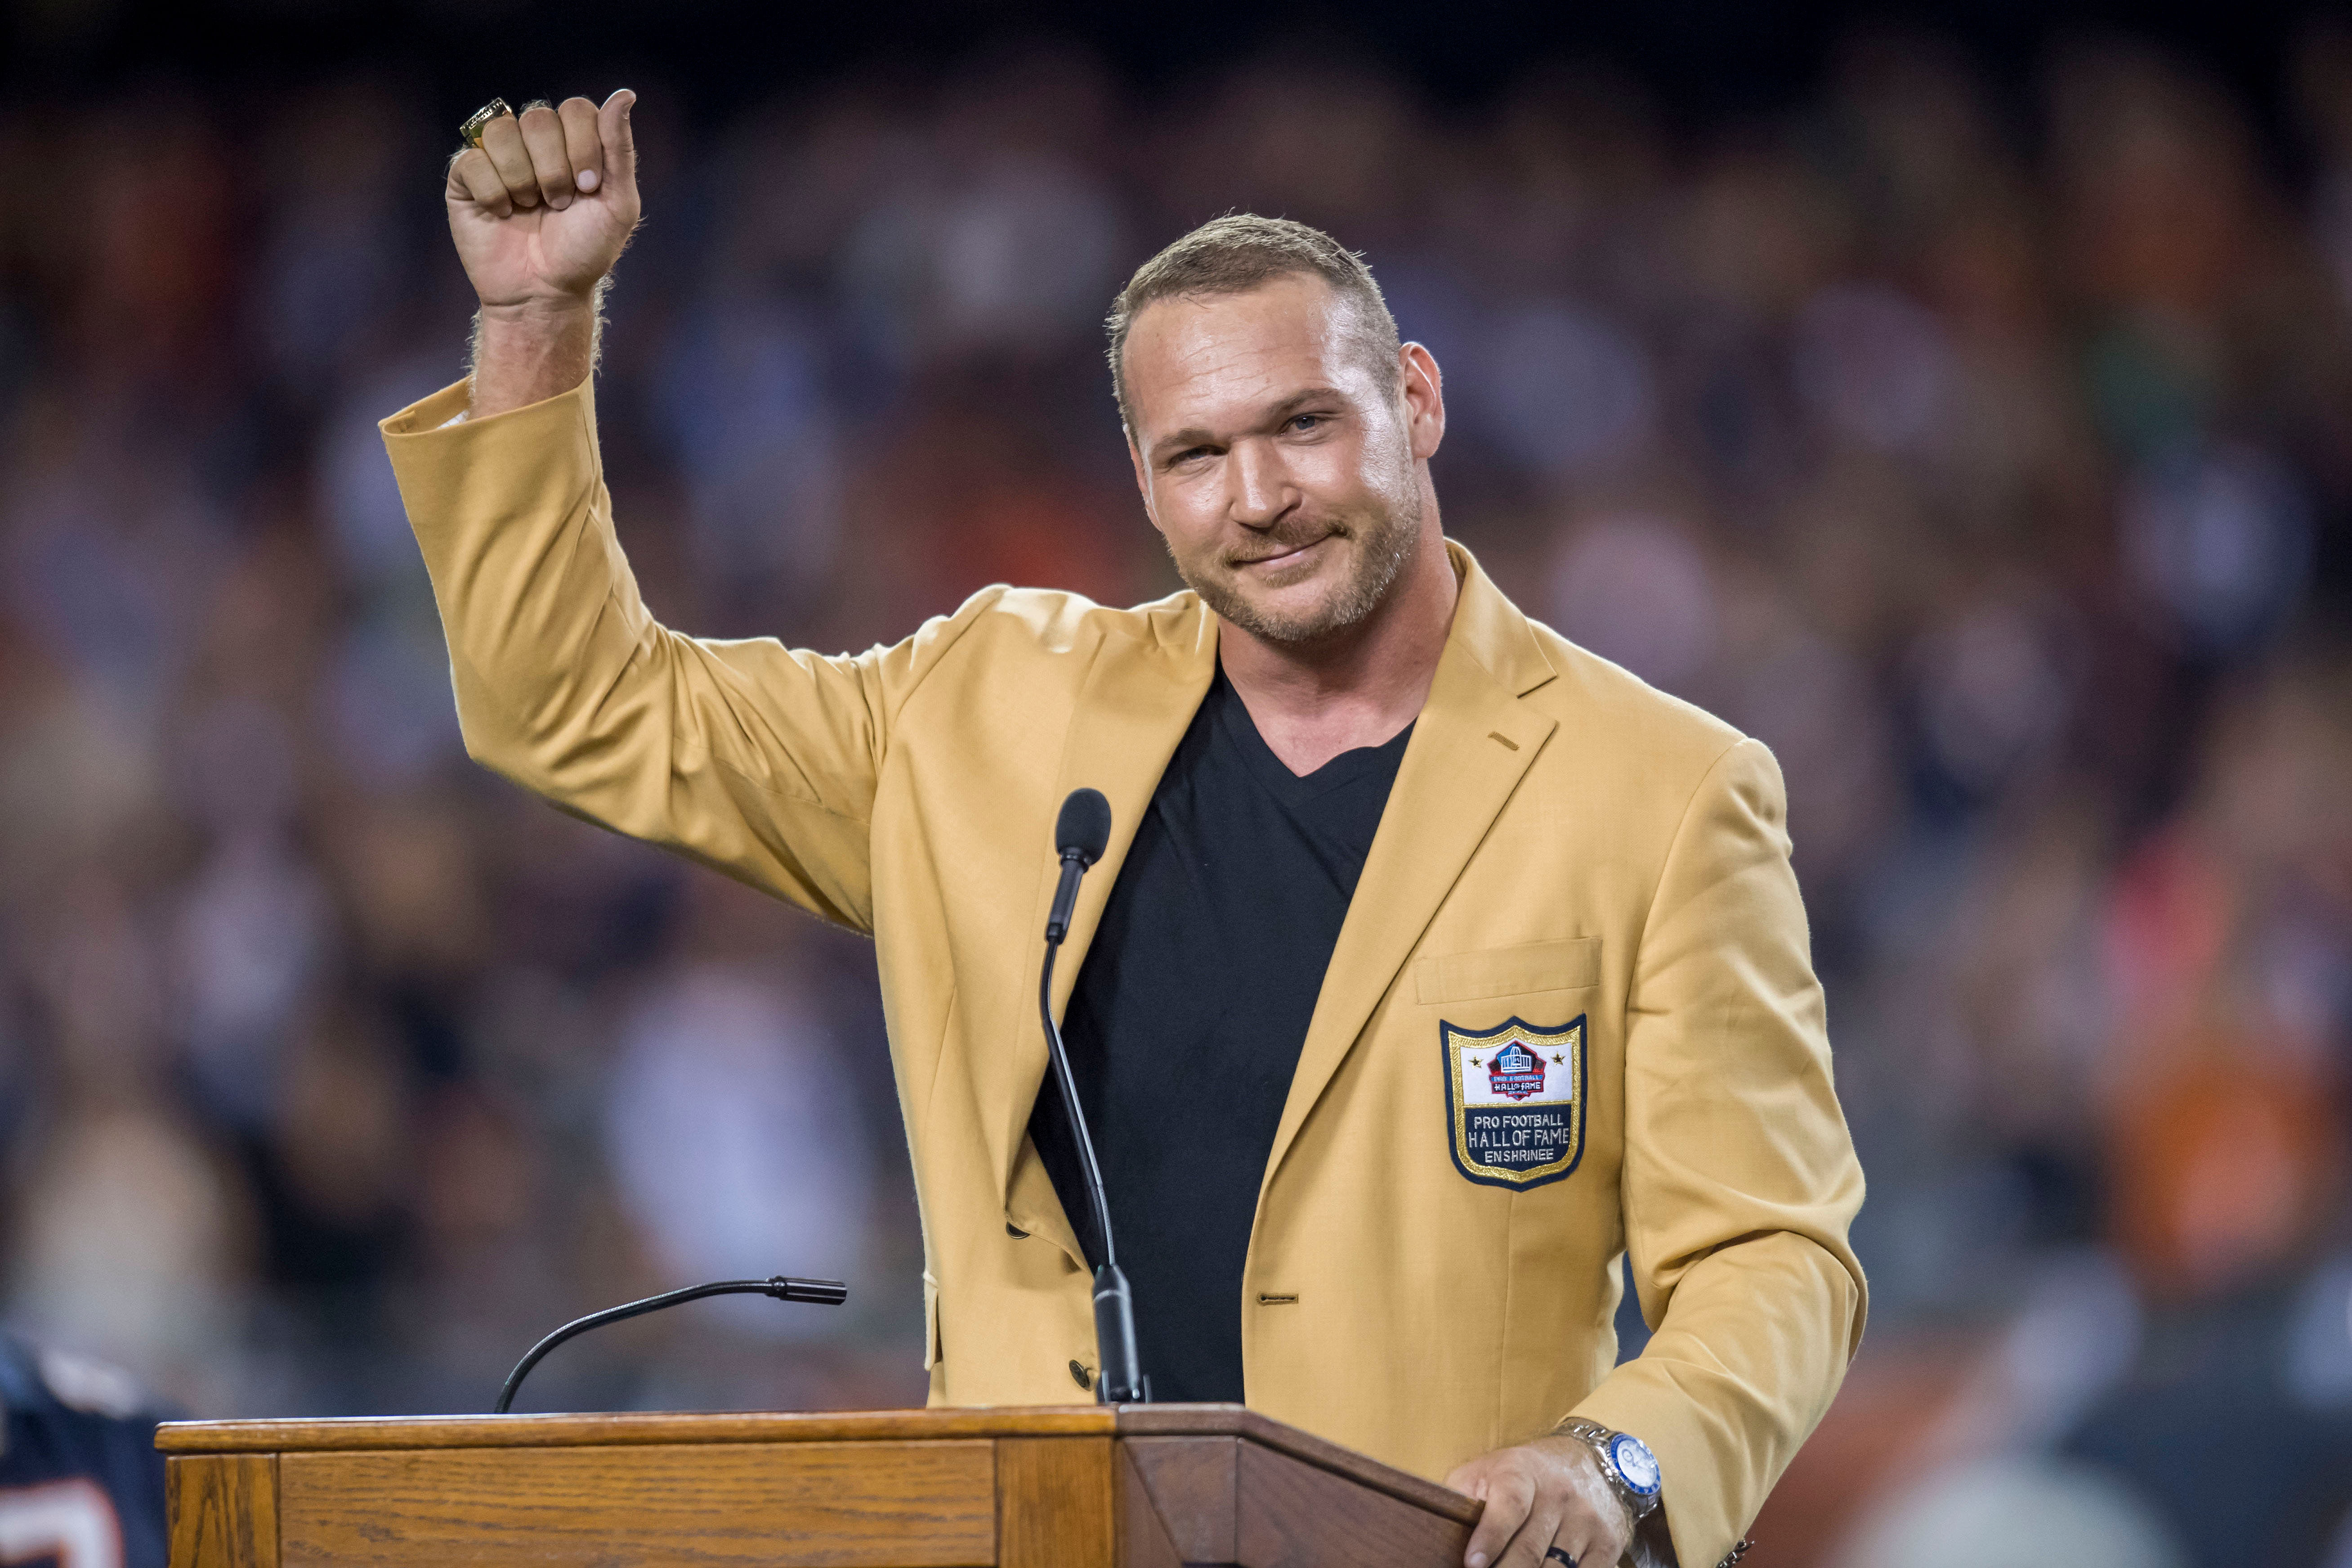 Chicago Bears former player Brian Urlacher (Image credit: Imagn)